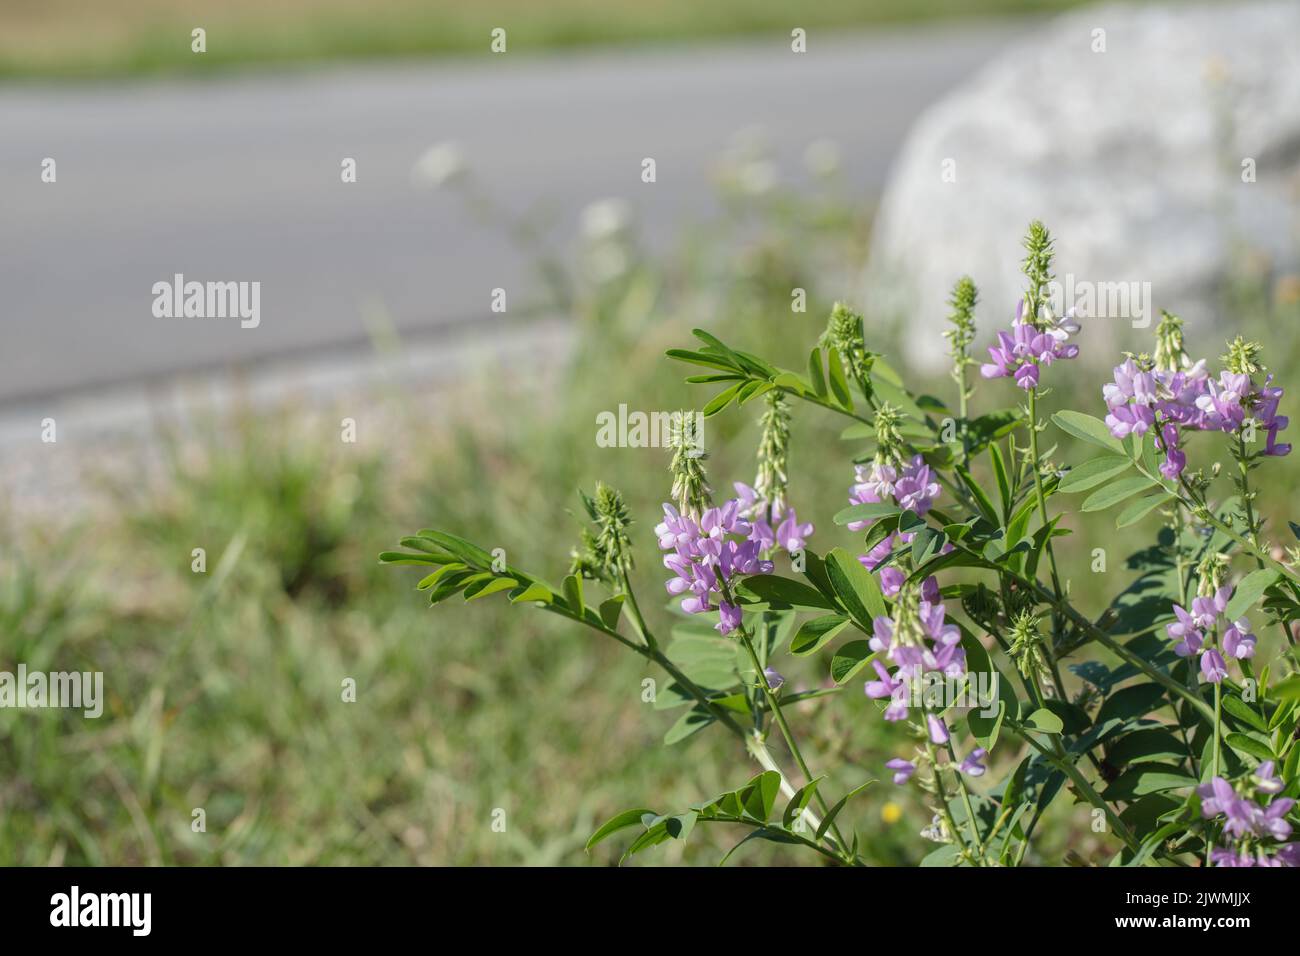 Goat's rue (Gallega officinalis) grows on a wayside. Stock Photo